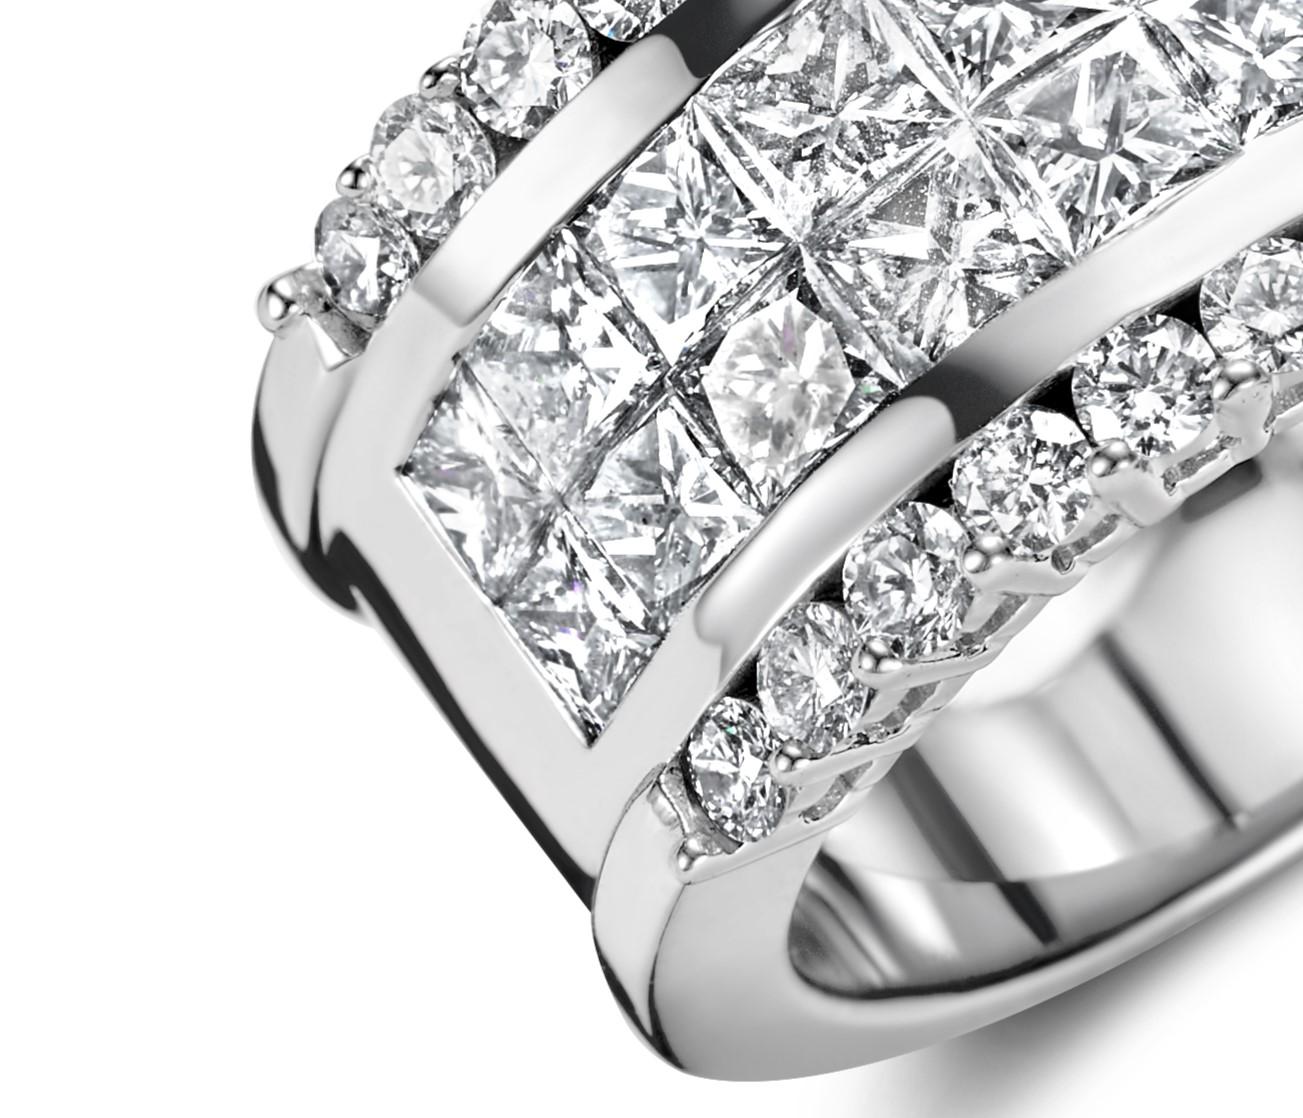 Women's or Men's 18kt White Gold Ring With 2.5 ct Princess cut & 1 ct Brilliant cut Diamond For Sale